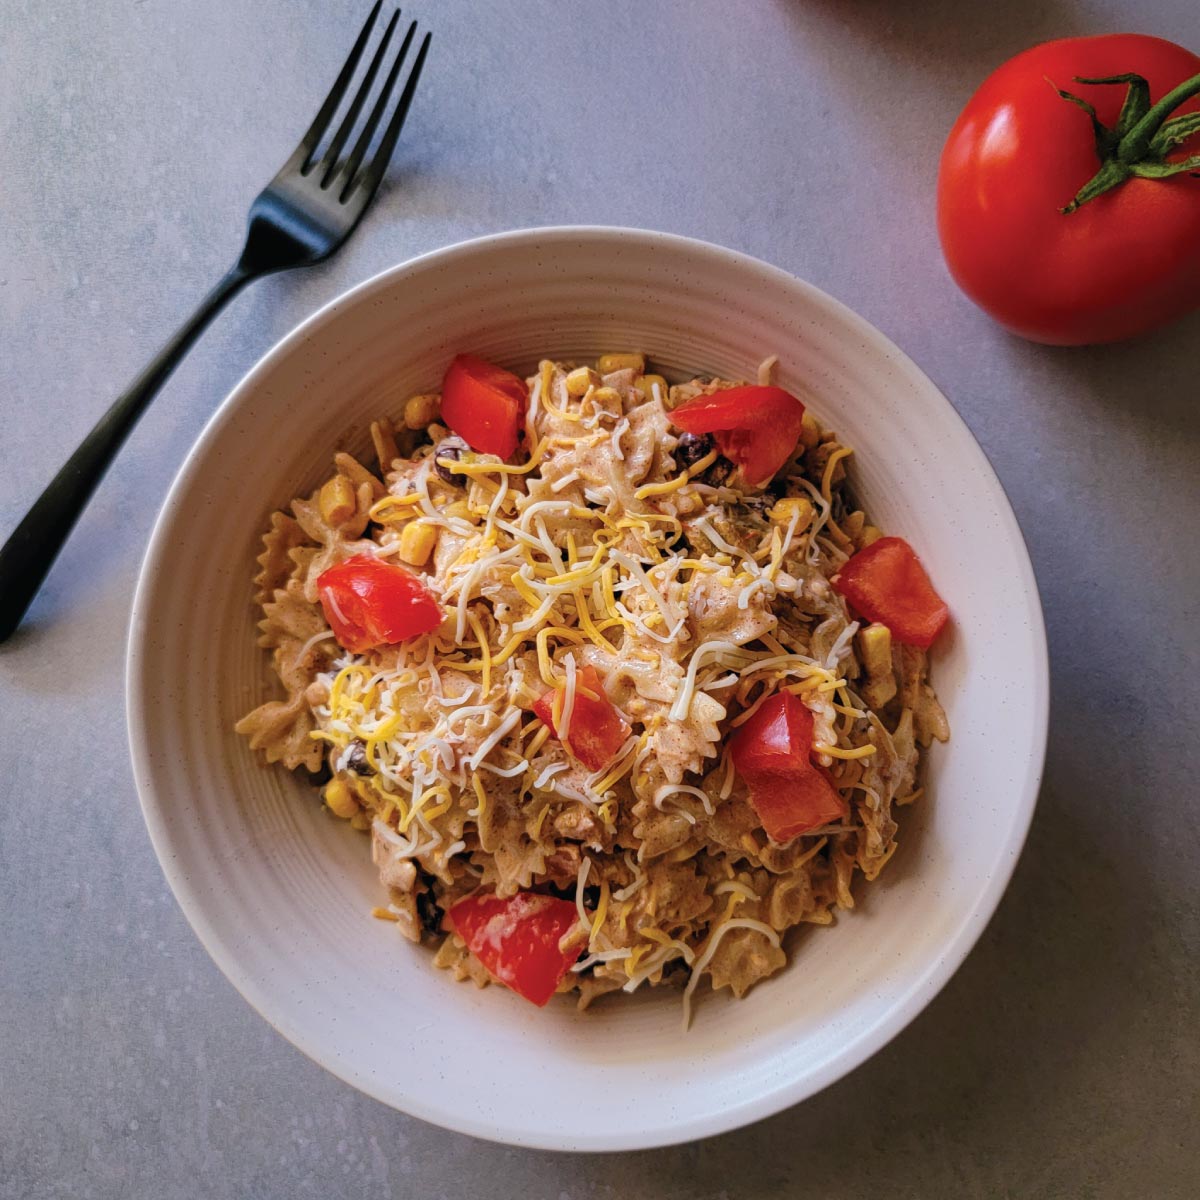 Taco pasta salad in a serving bowl with cheese and diced tomatoes on top for a garnish.